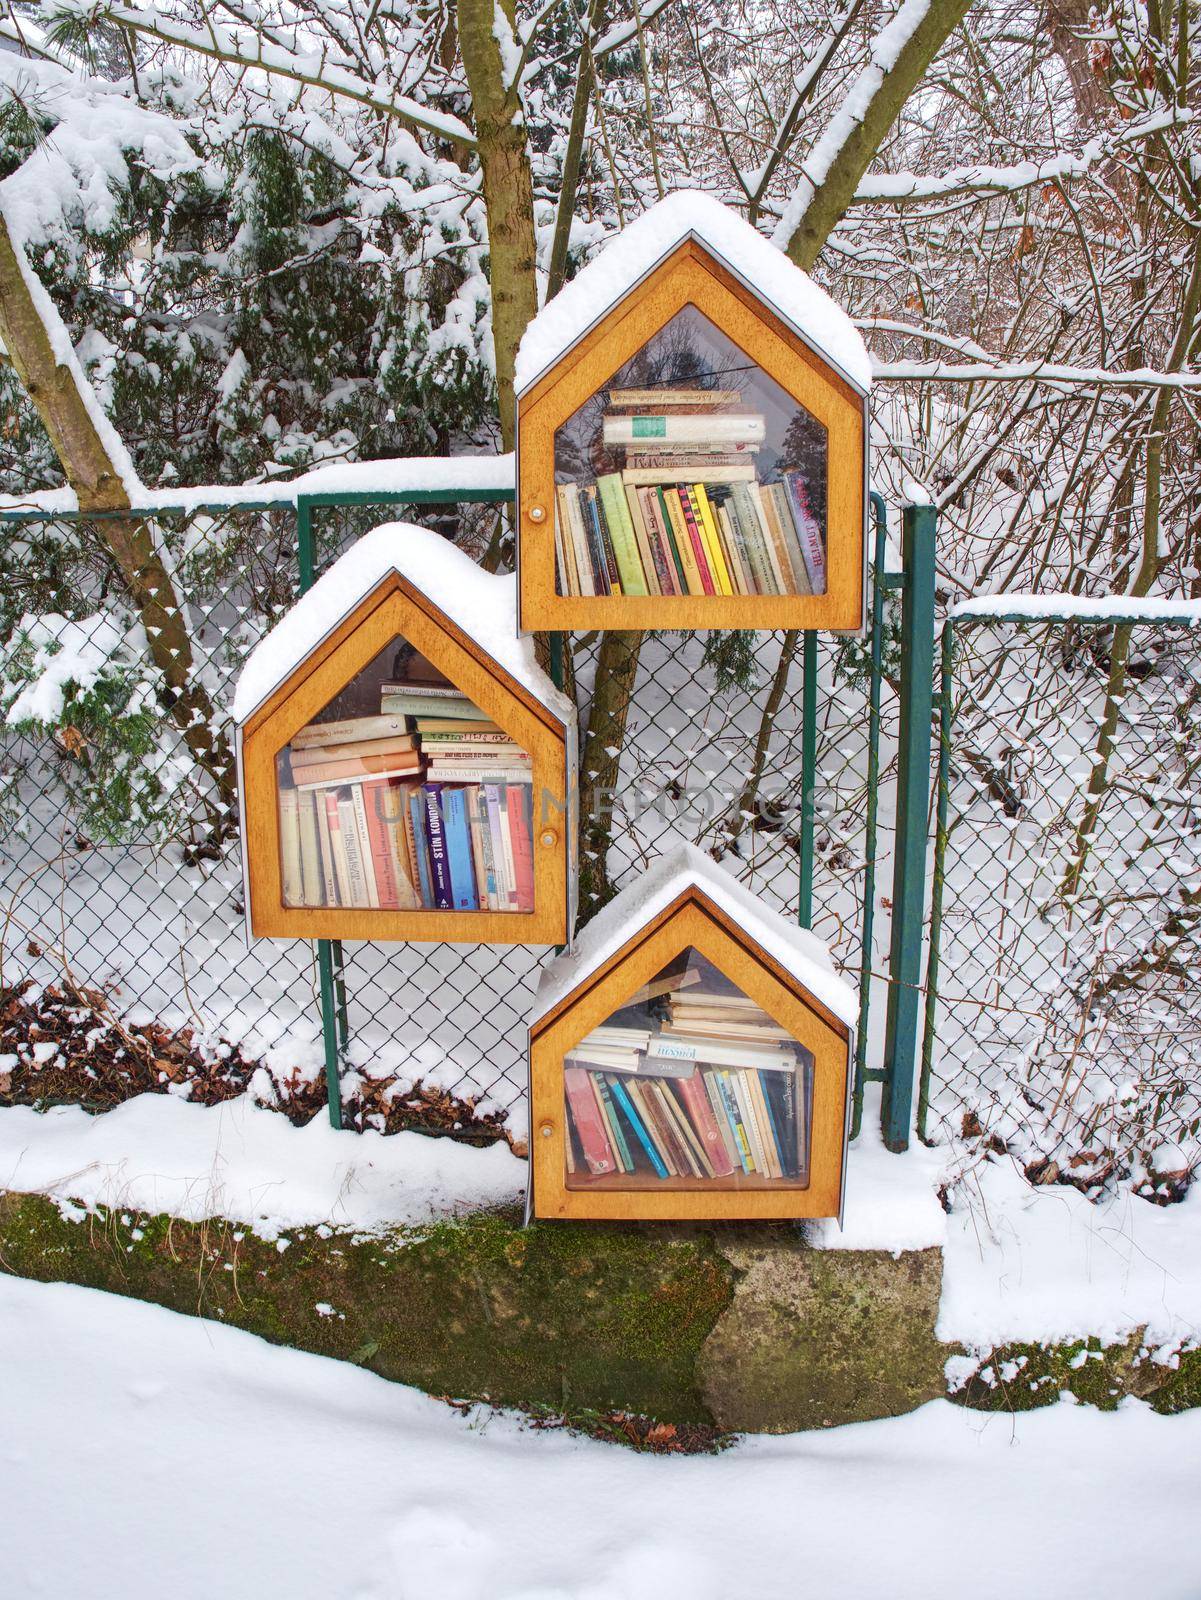 Library in Residential Neighborhood. Little Free Library by rdonar2